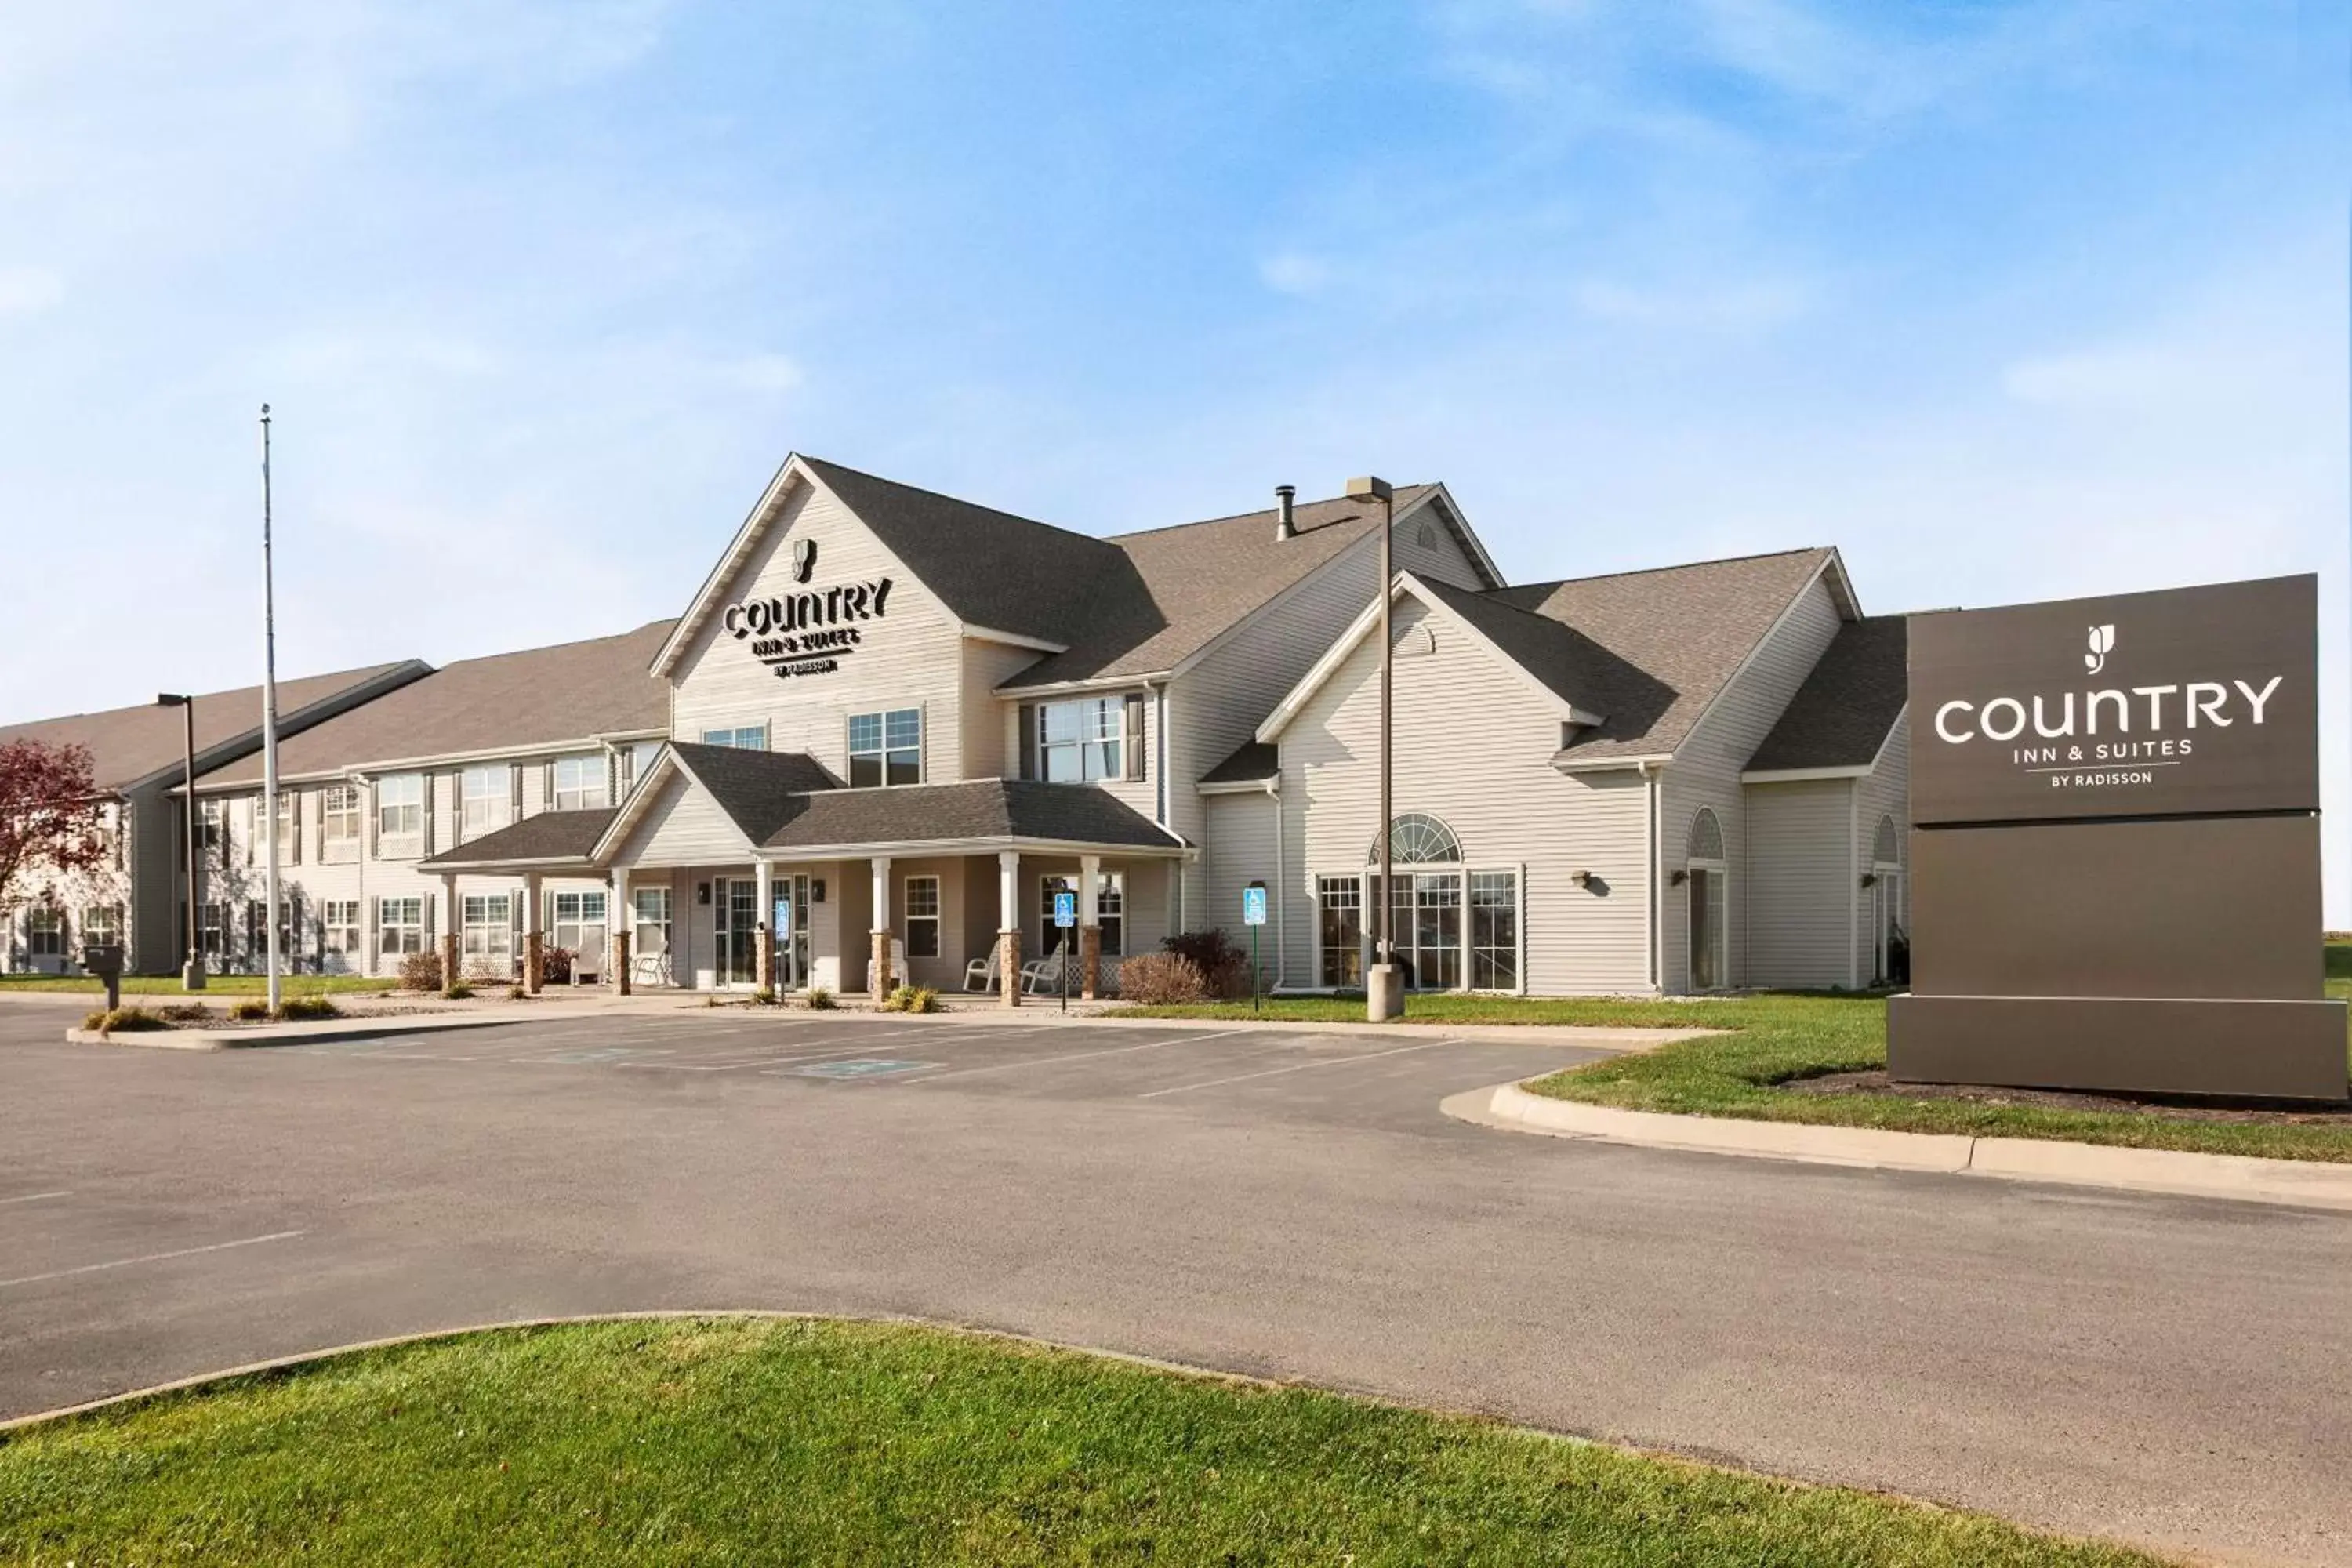 Property Building in Country Inn & Suites by Radisson, Fort Dodge, IA